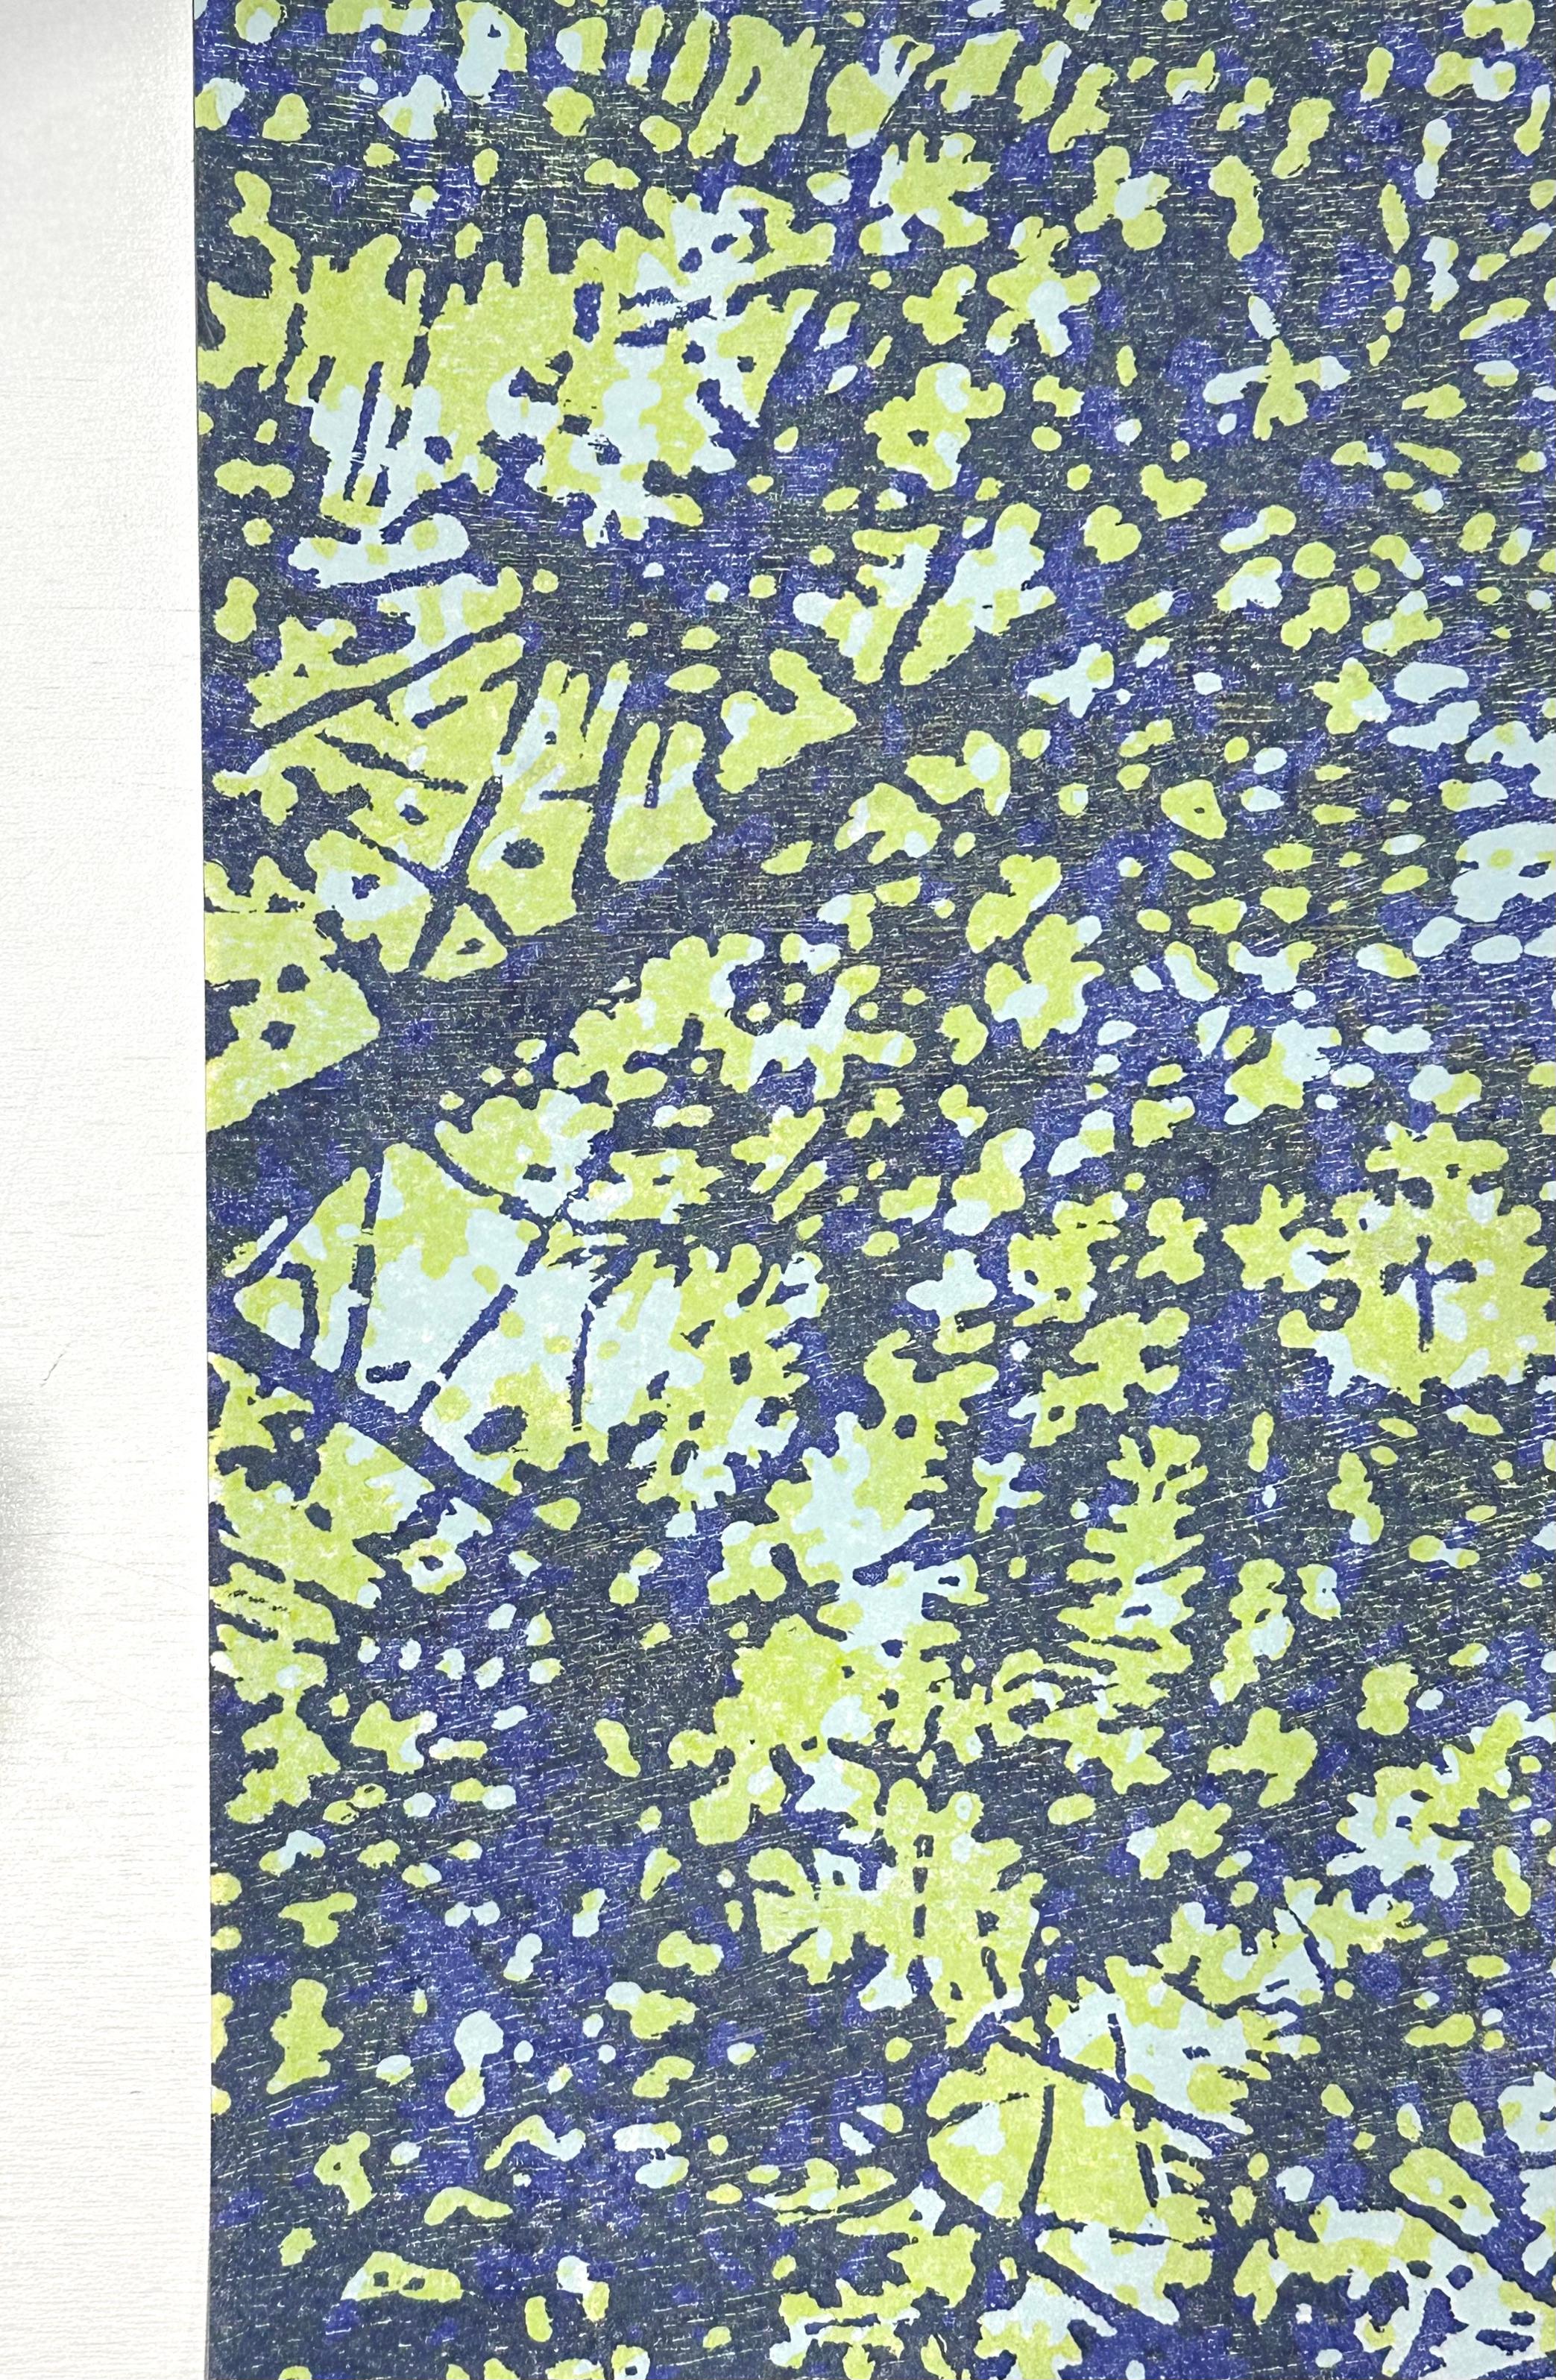 This square woodcut print on paper evokes the peacefulness of looking upwards through a forest canopy in a symmetrical pattern composed of the silhouettes of trees in shades of cobalt blue, and light yellow green.The monotype brings to mind the